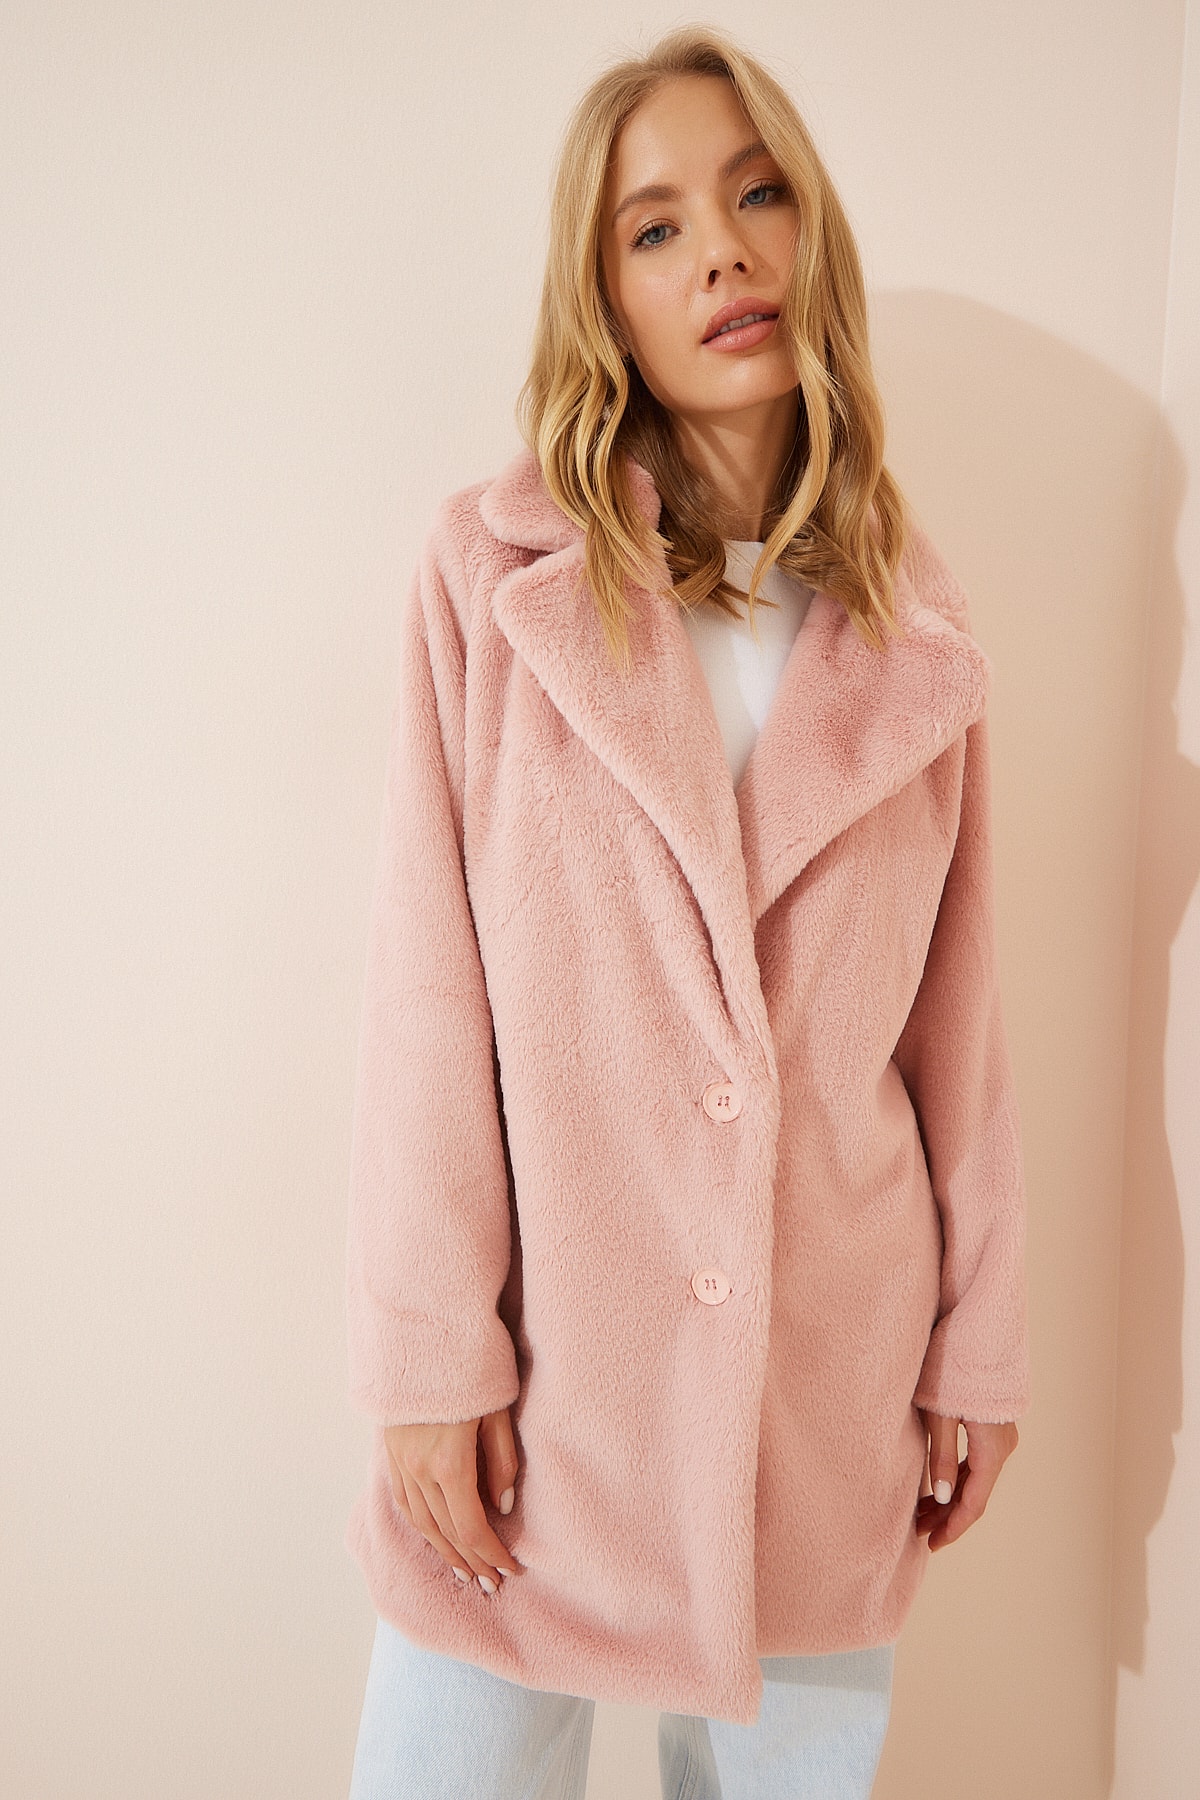 Happiness İstanbul Women's Pink Faux Fur Coat